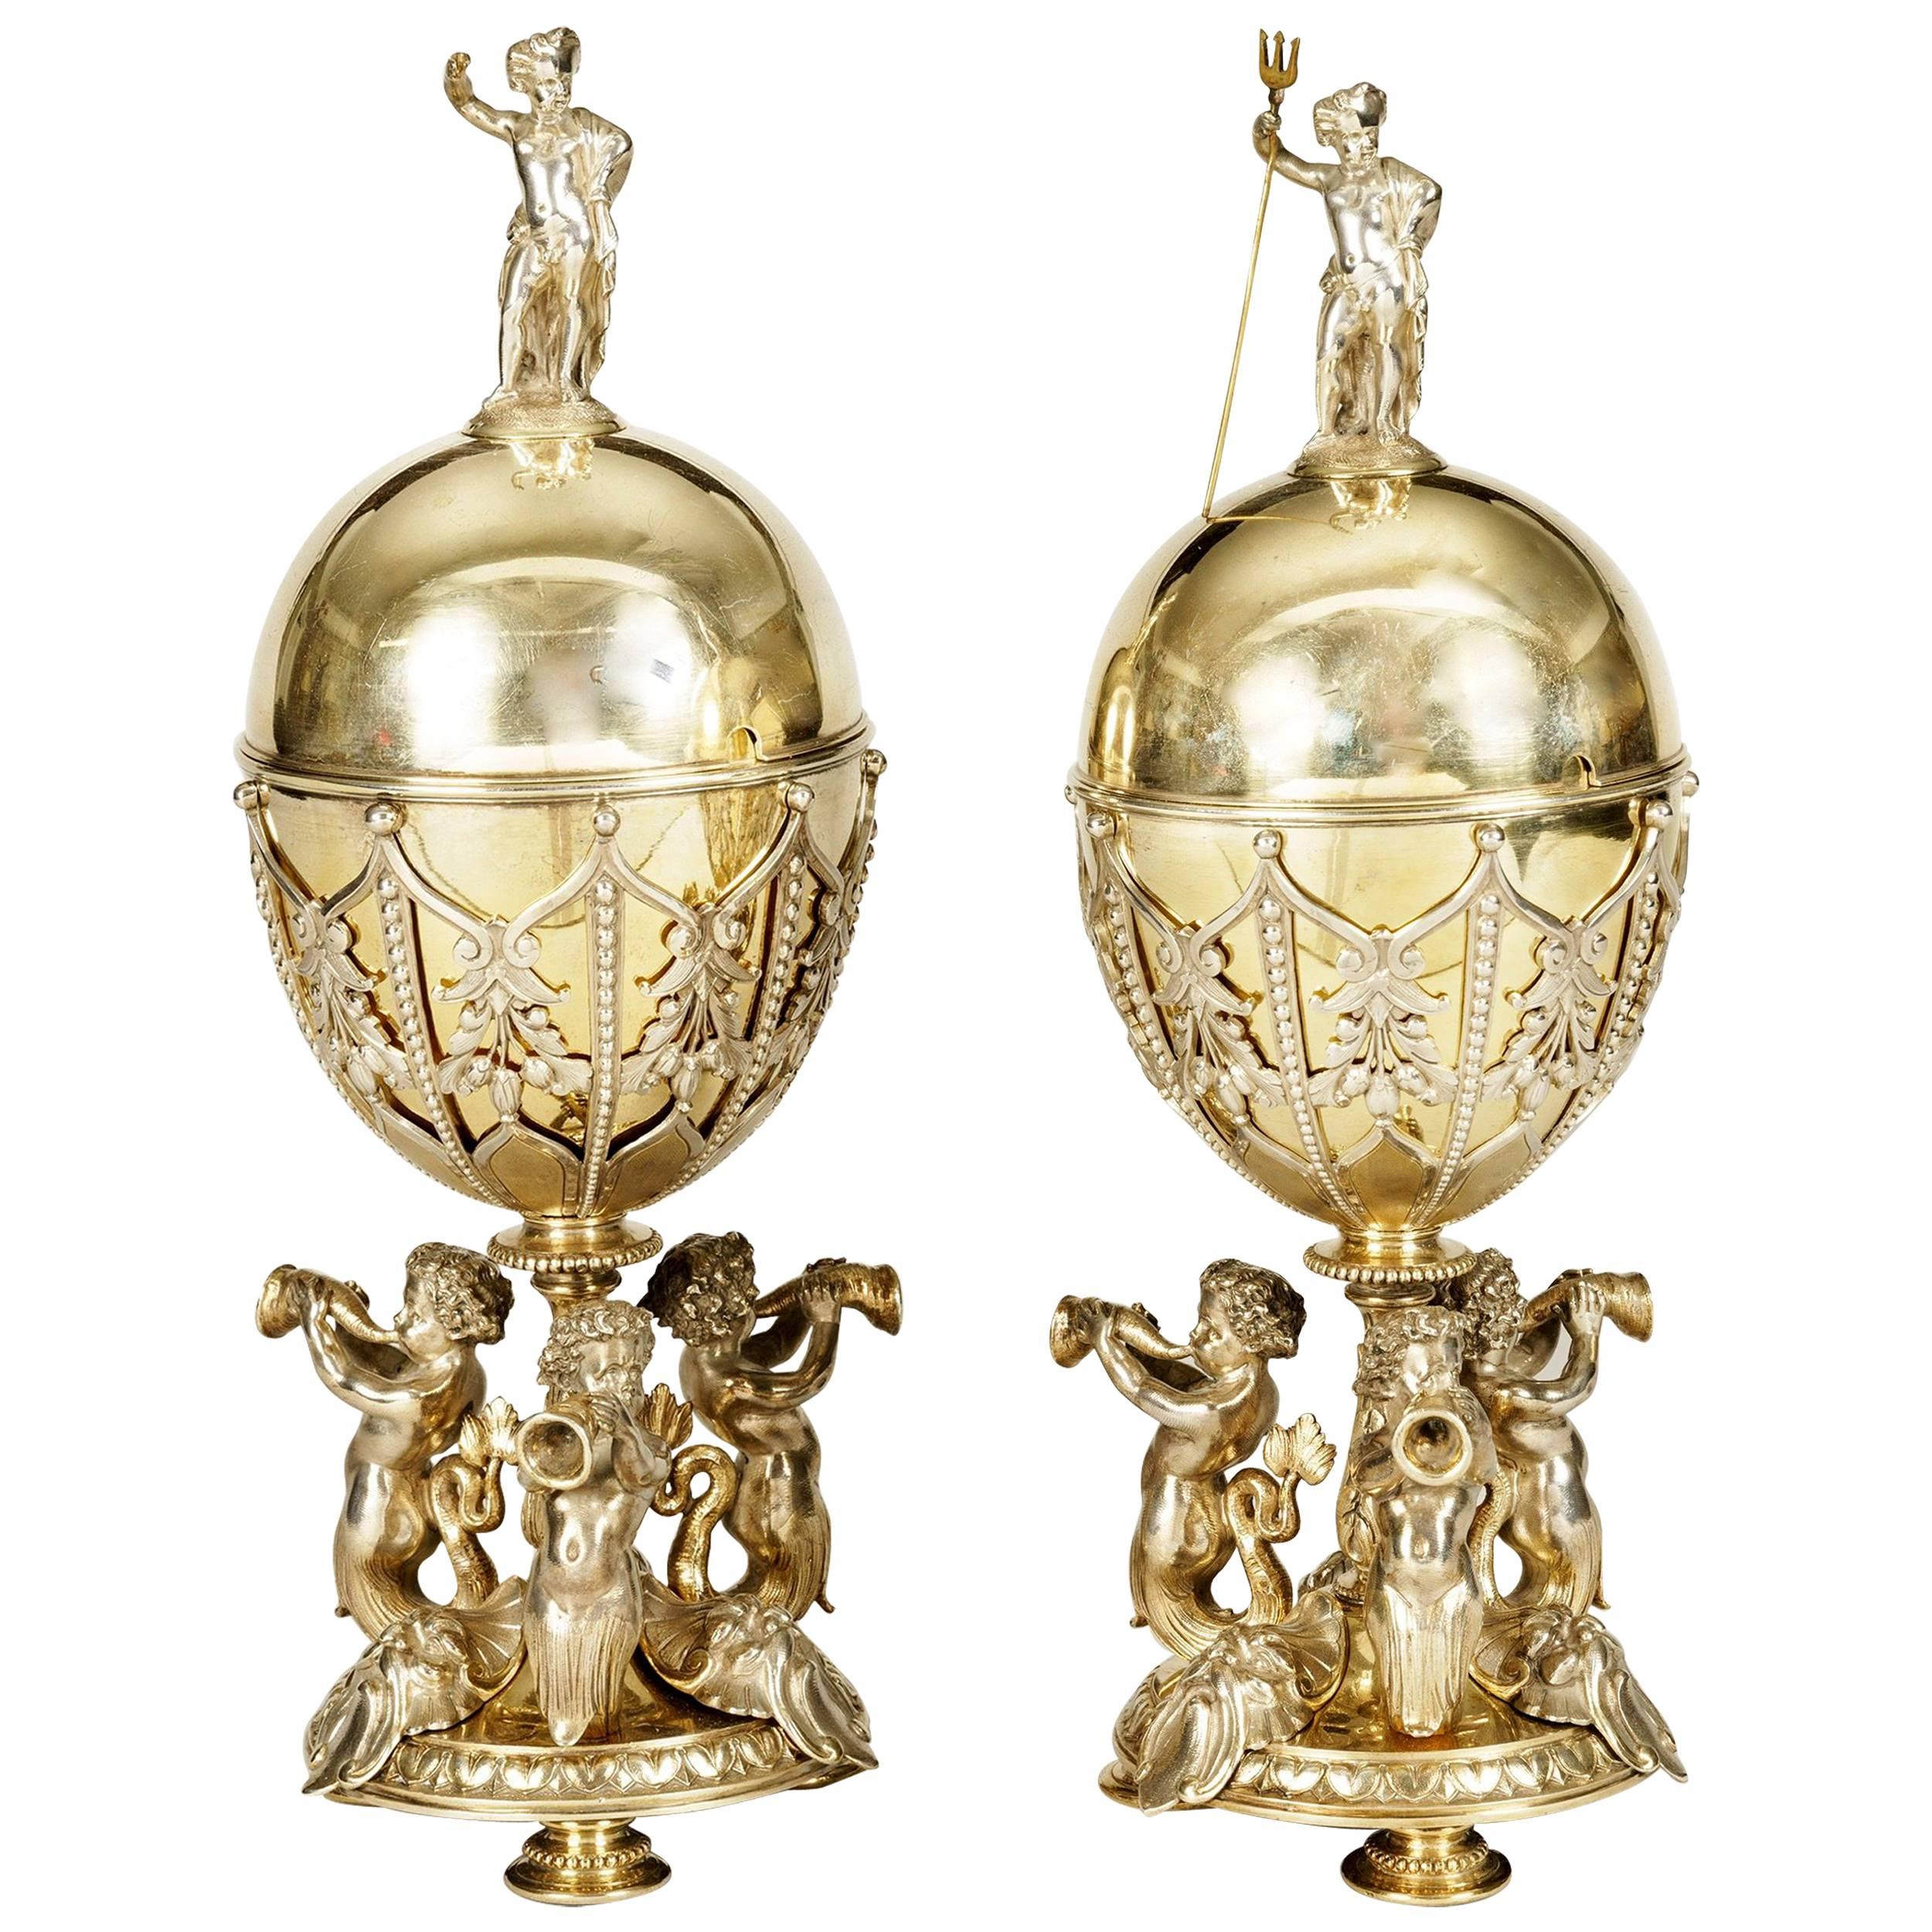 19th Century Pair of Elkington & Company Silver Plated Lidded Chalices